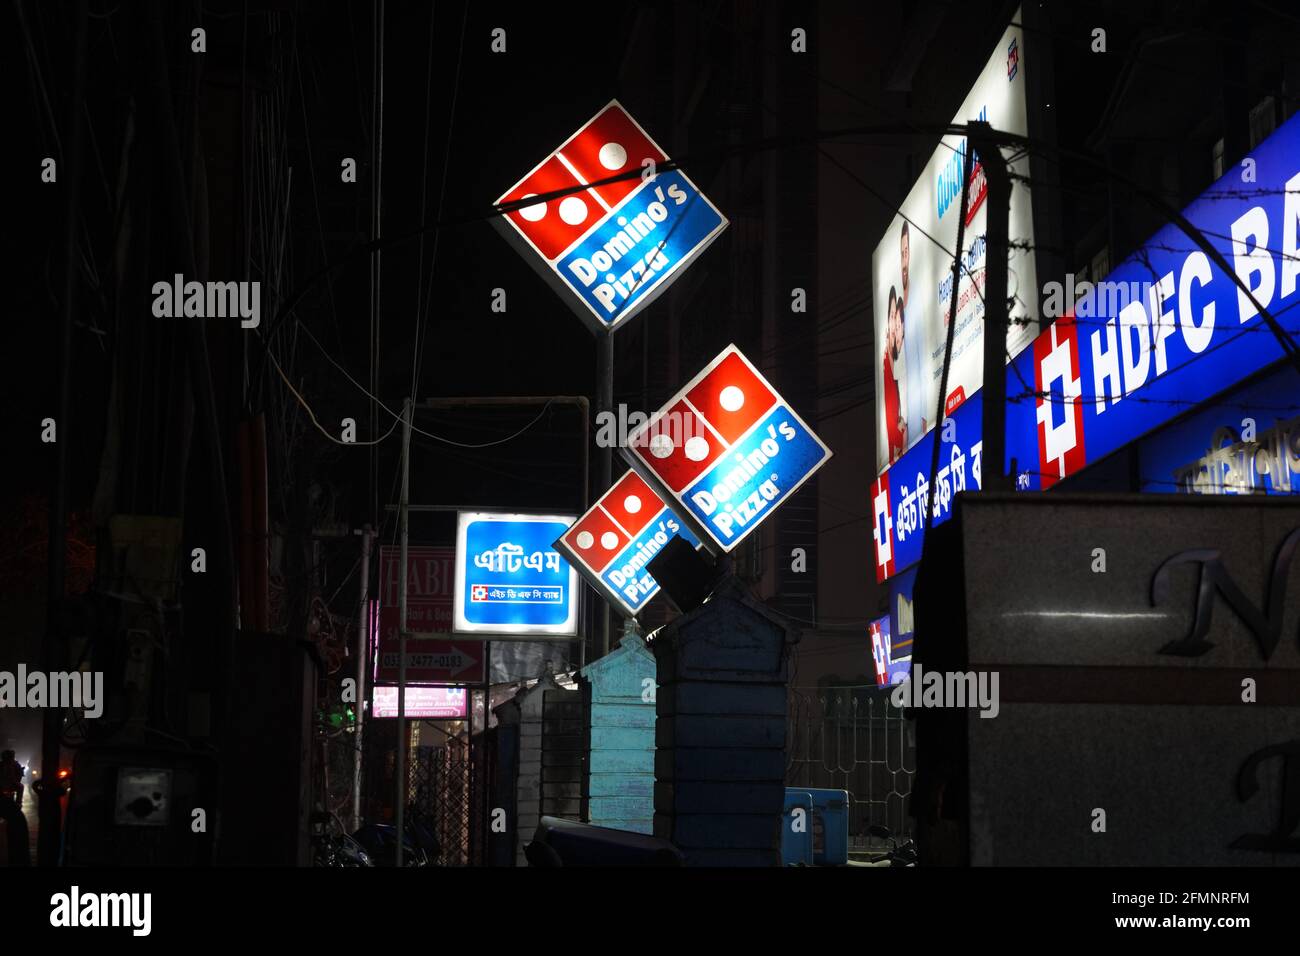 February 2021, Kolkata, India, Neon signs glow boards of Domino' pizza and HDFC Bank during lockdown pandemic at night. Stock Photo